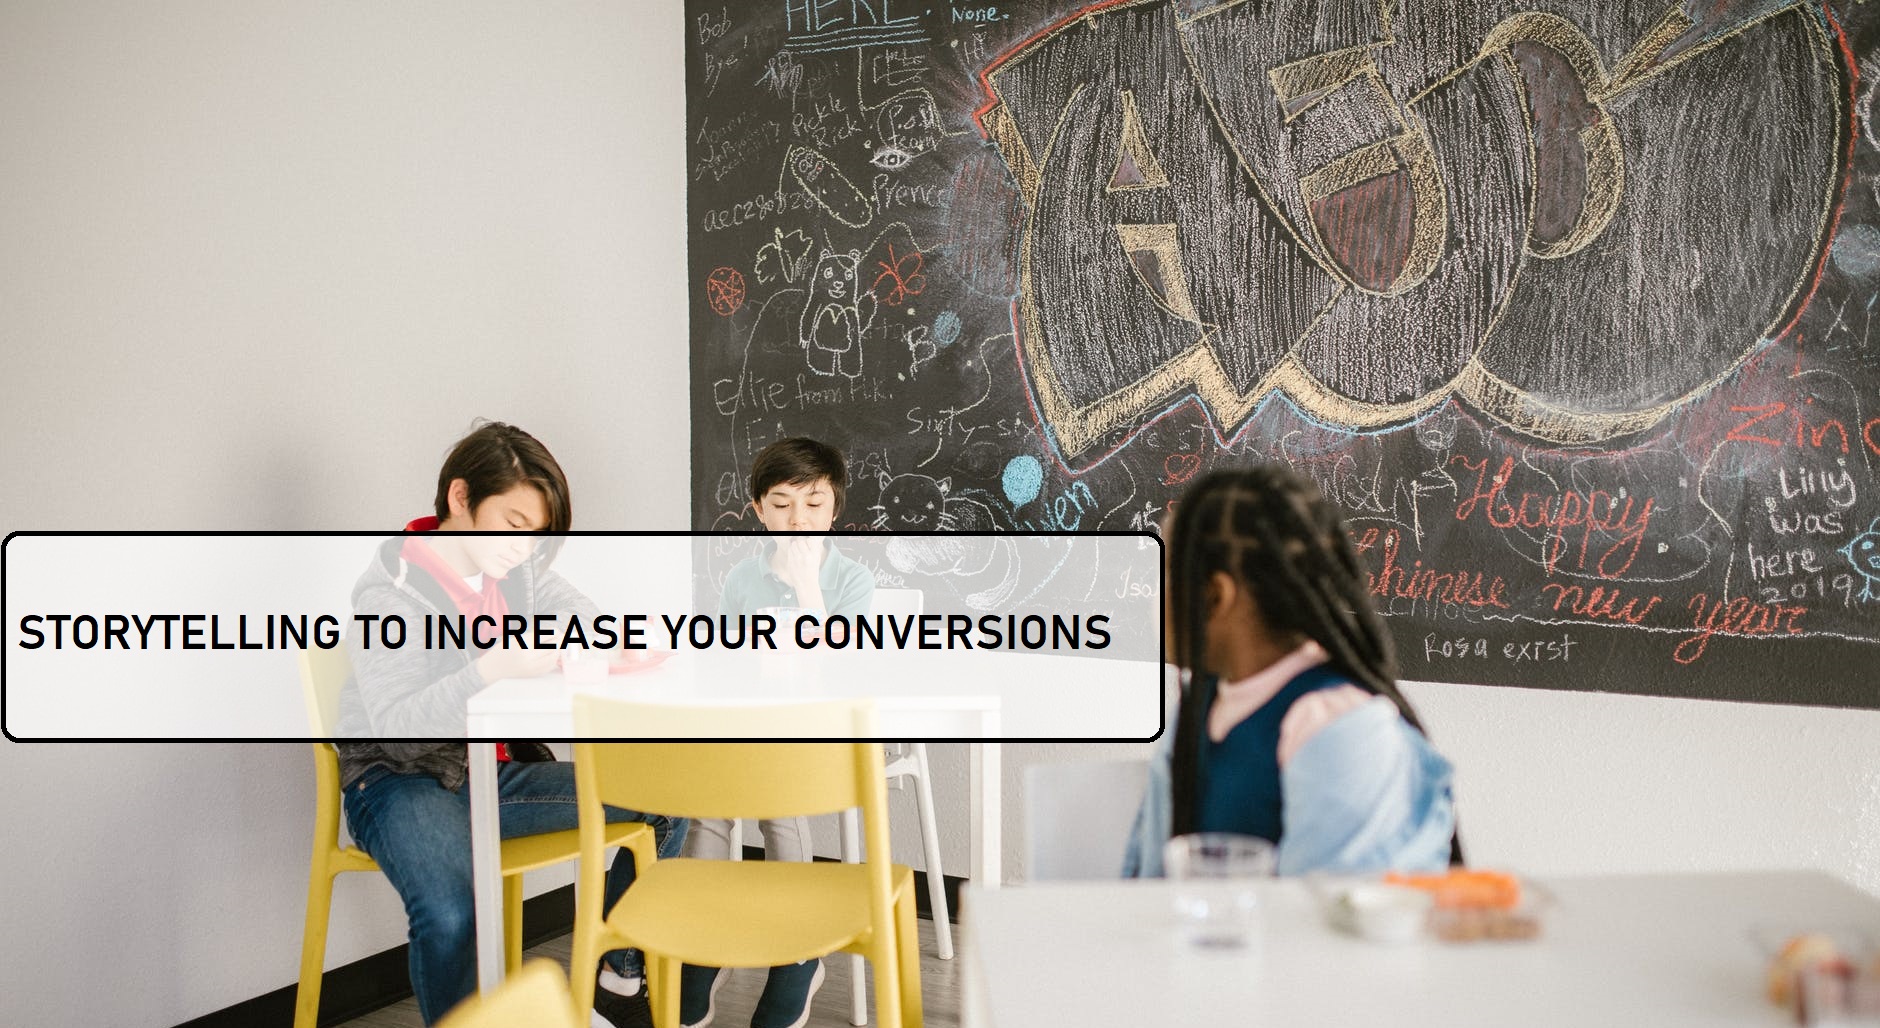 STORYTELLING TO INCREASE YOUR CONVERSIONS